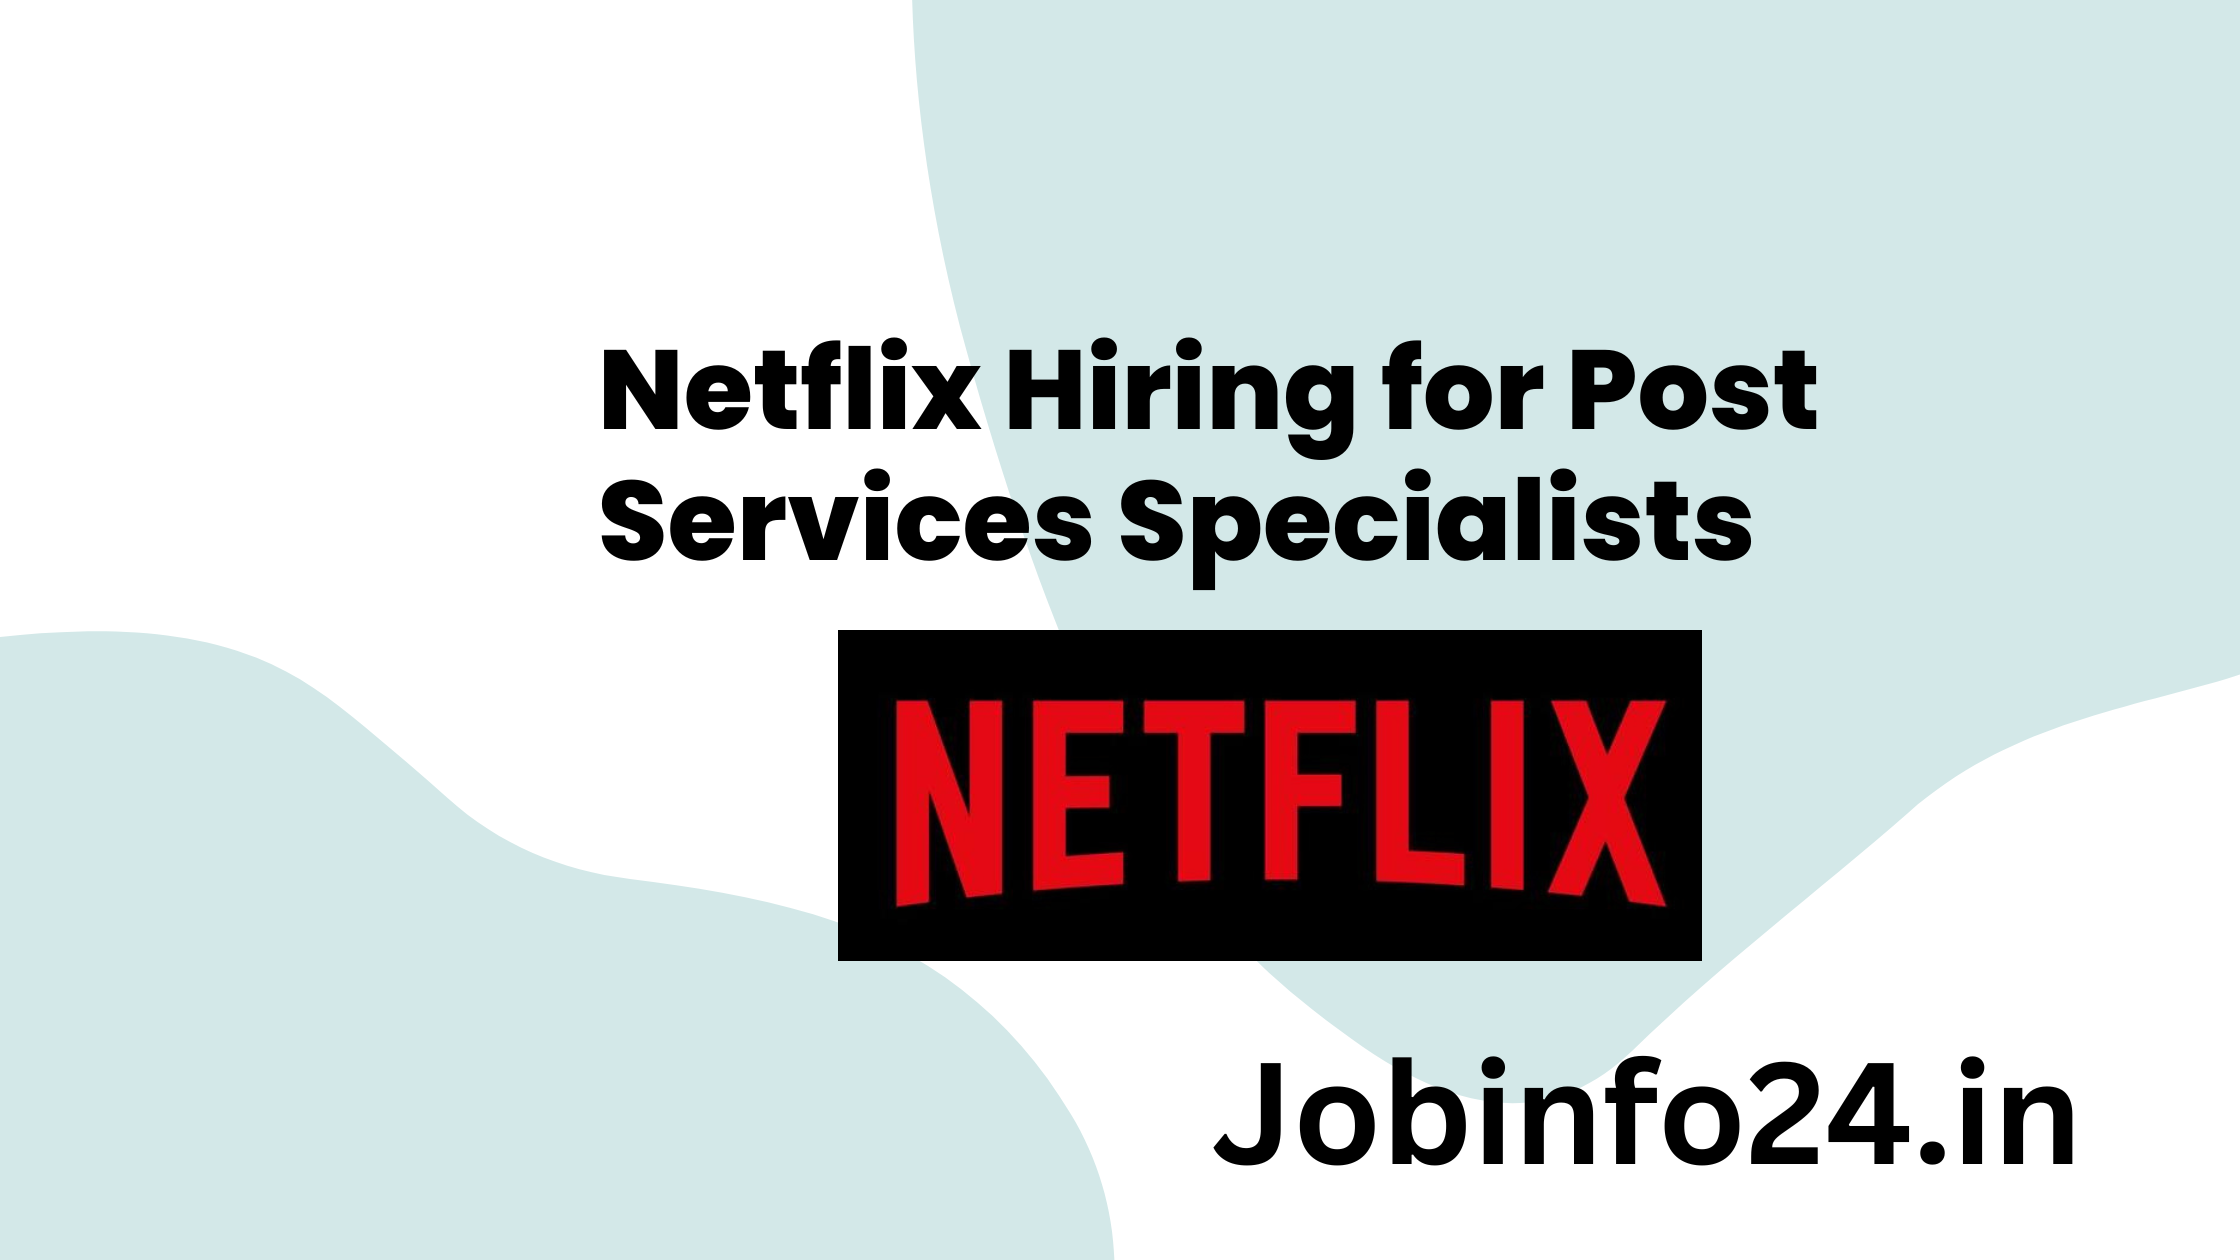 Netflix Hiring for Post Services Specialists